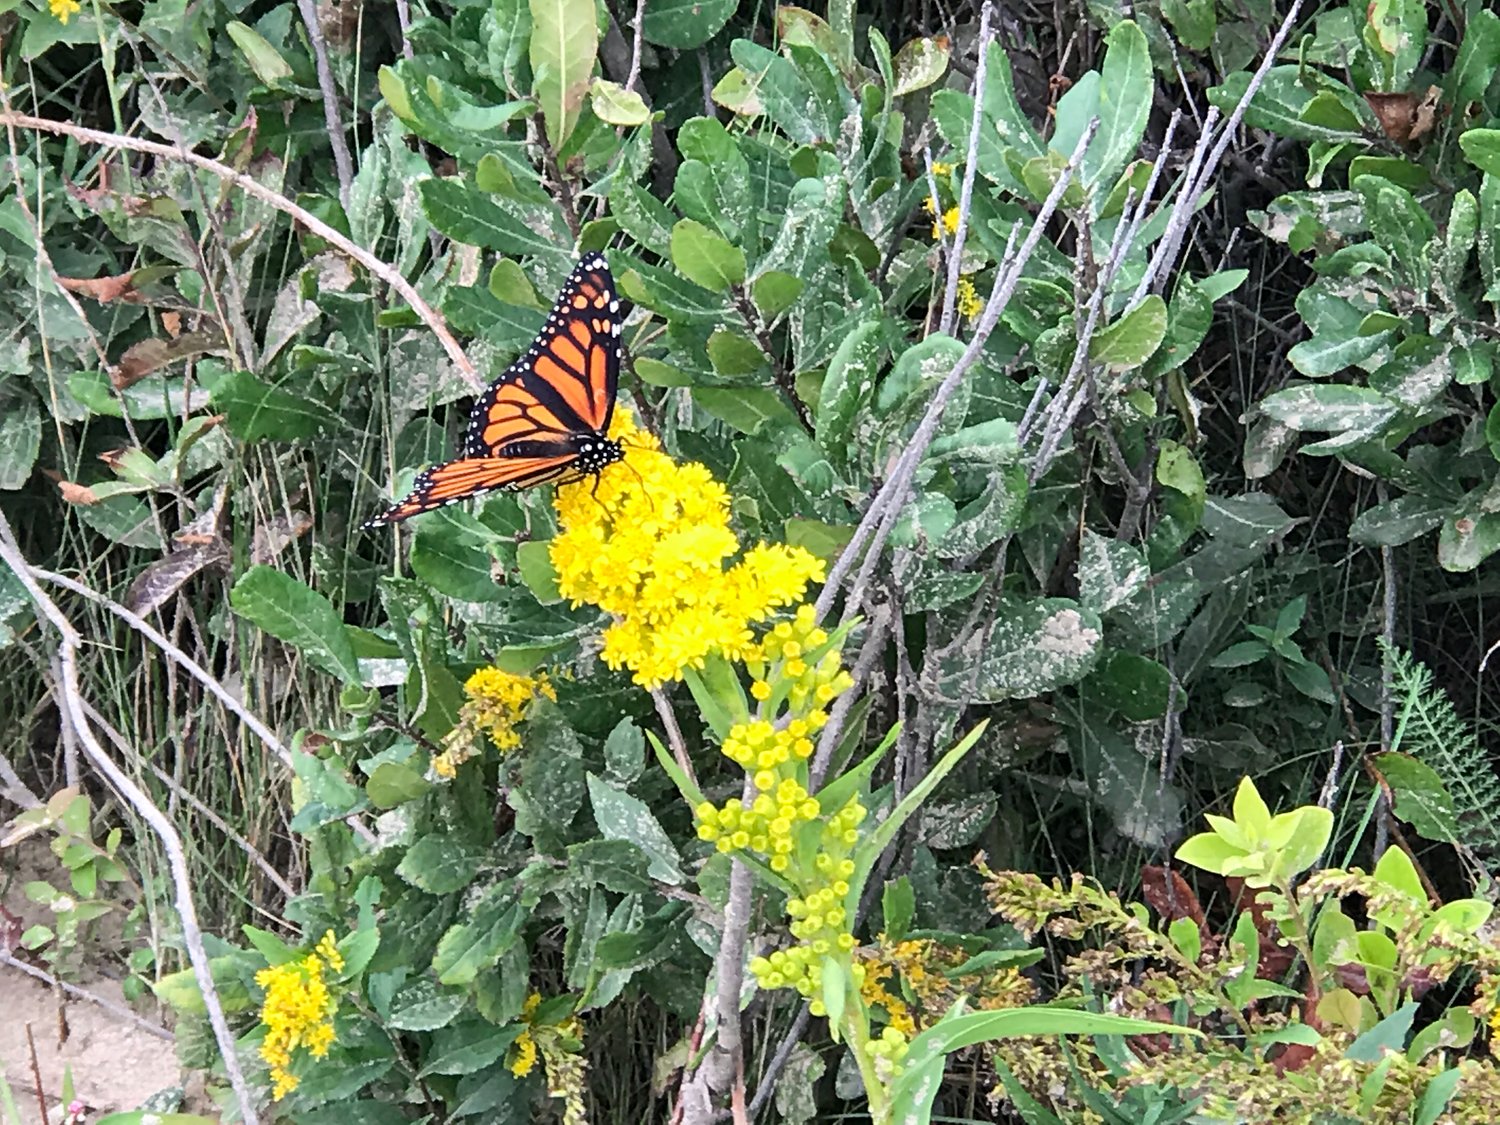 A monarch butterfly on seaside goldenrod in Smooth Hummocks.